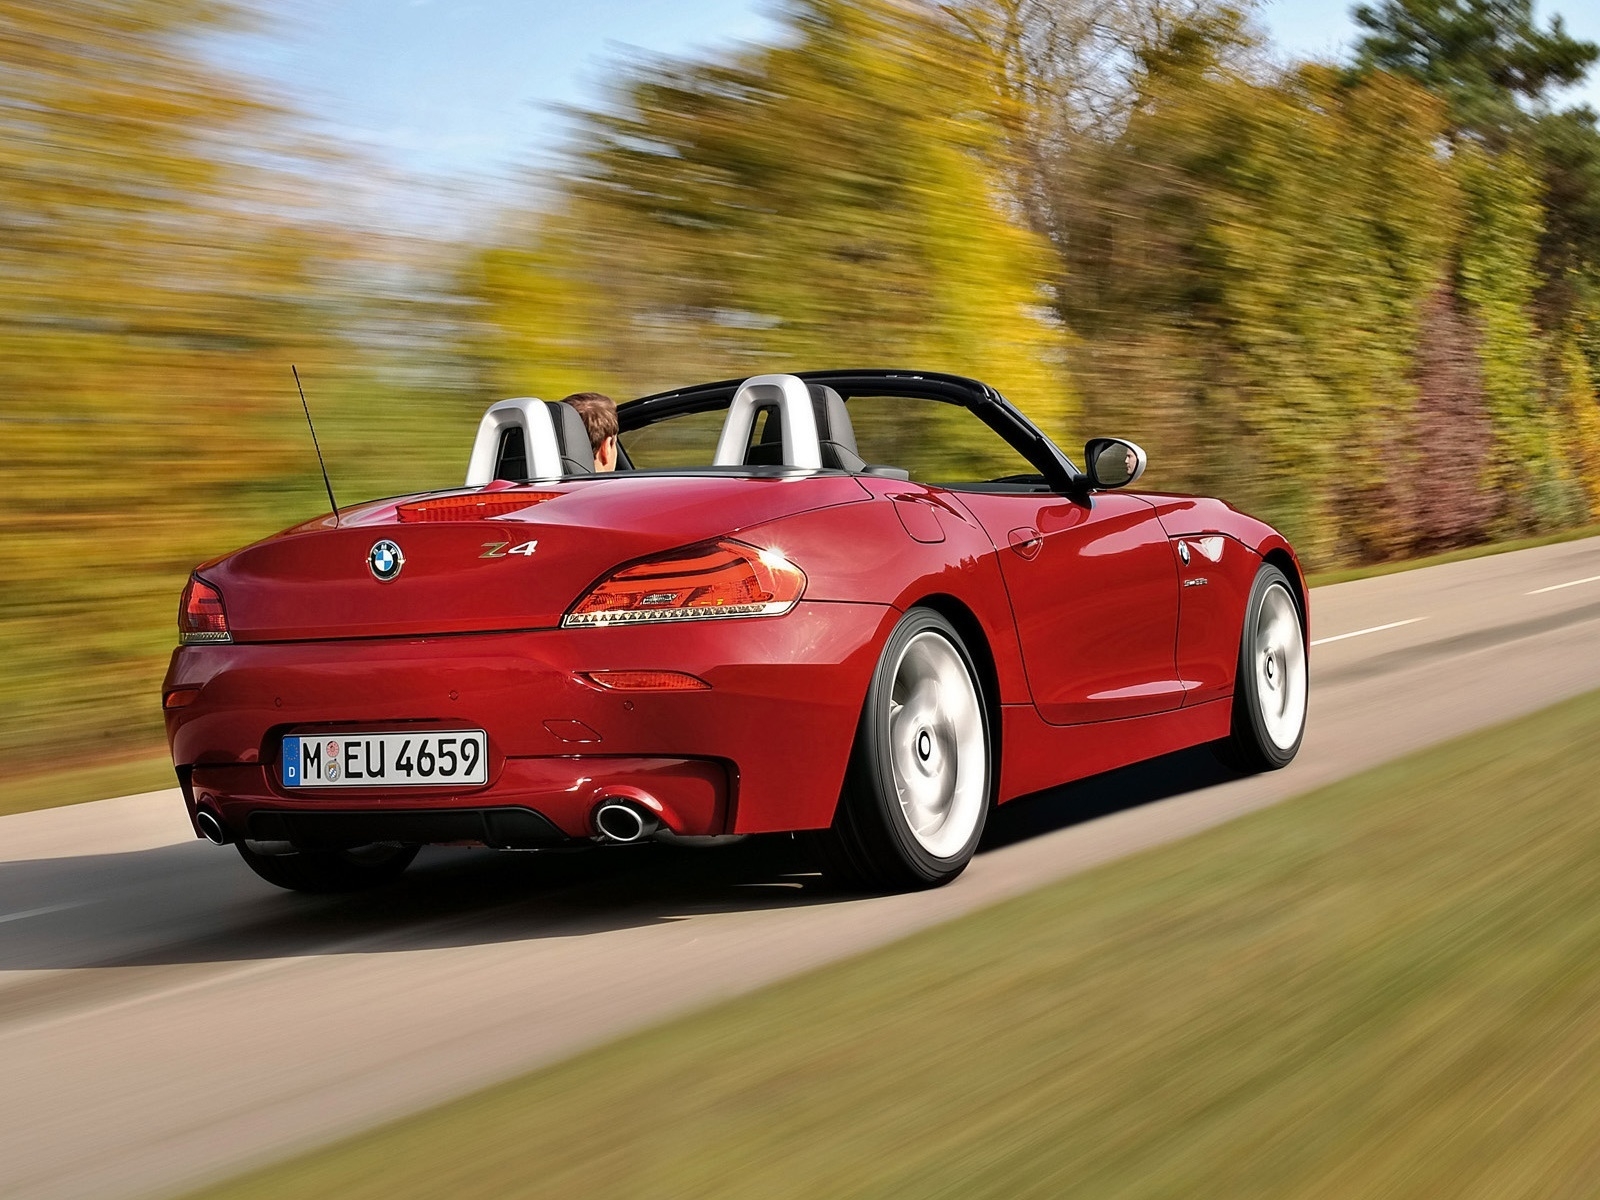 BMW Z4 sDrive35is Rear 2010 for 1600 x 1200 resolution